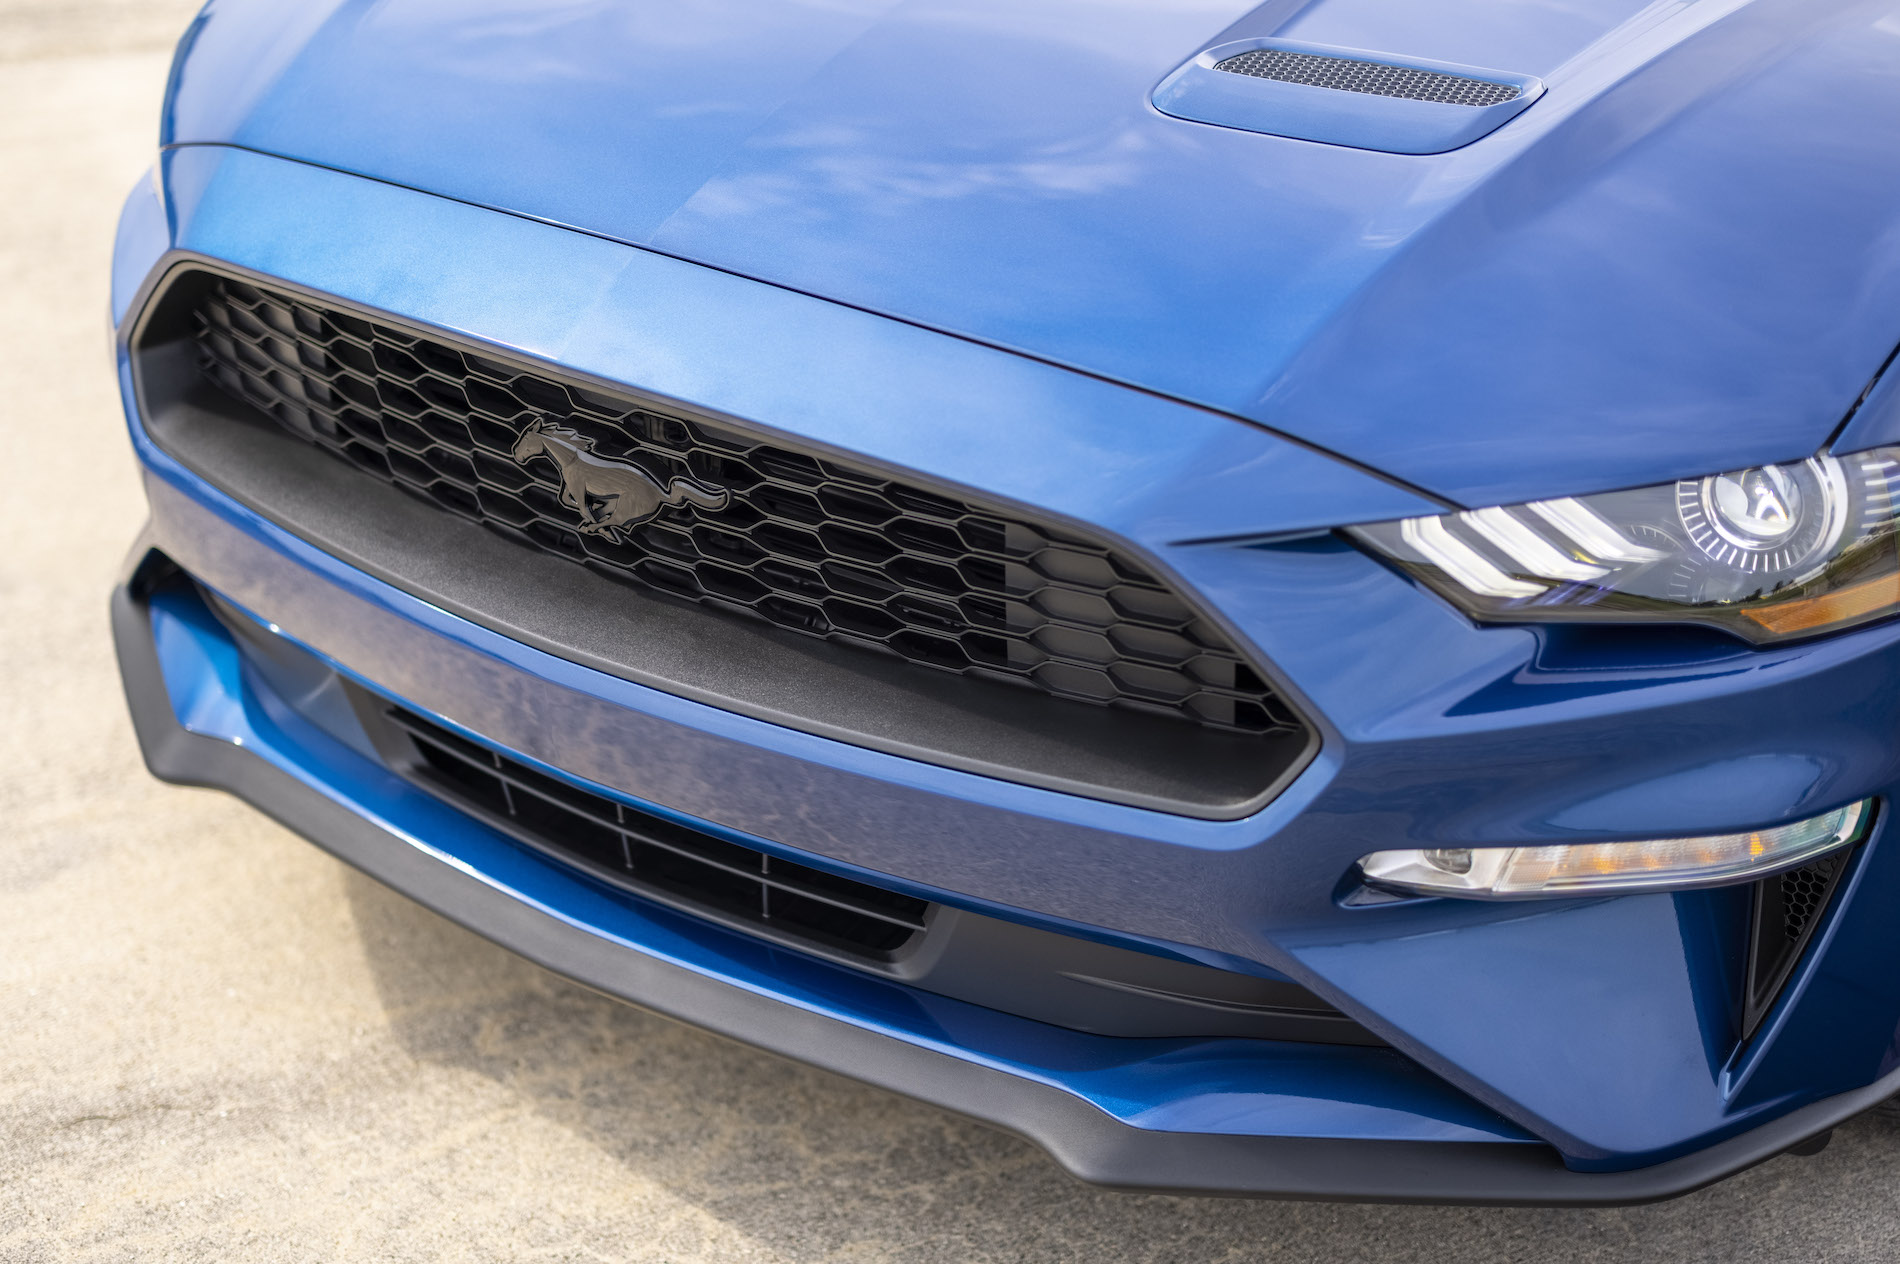 2022 Ford Mustang Stealth Edition_08.jpg